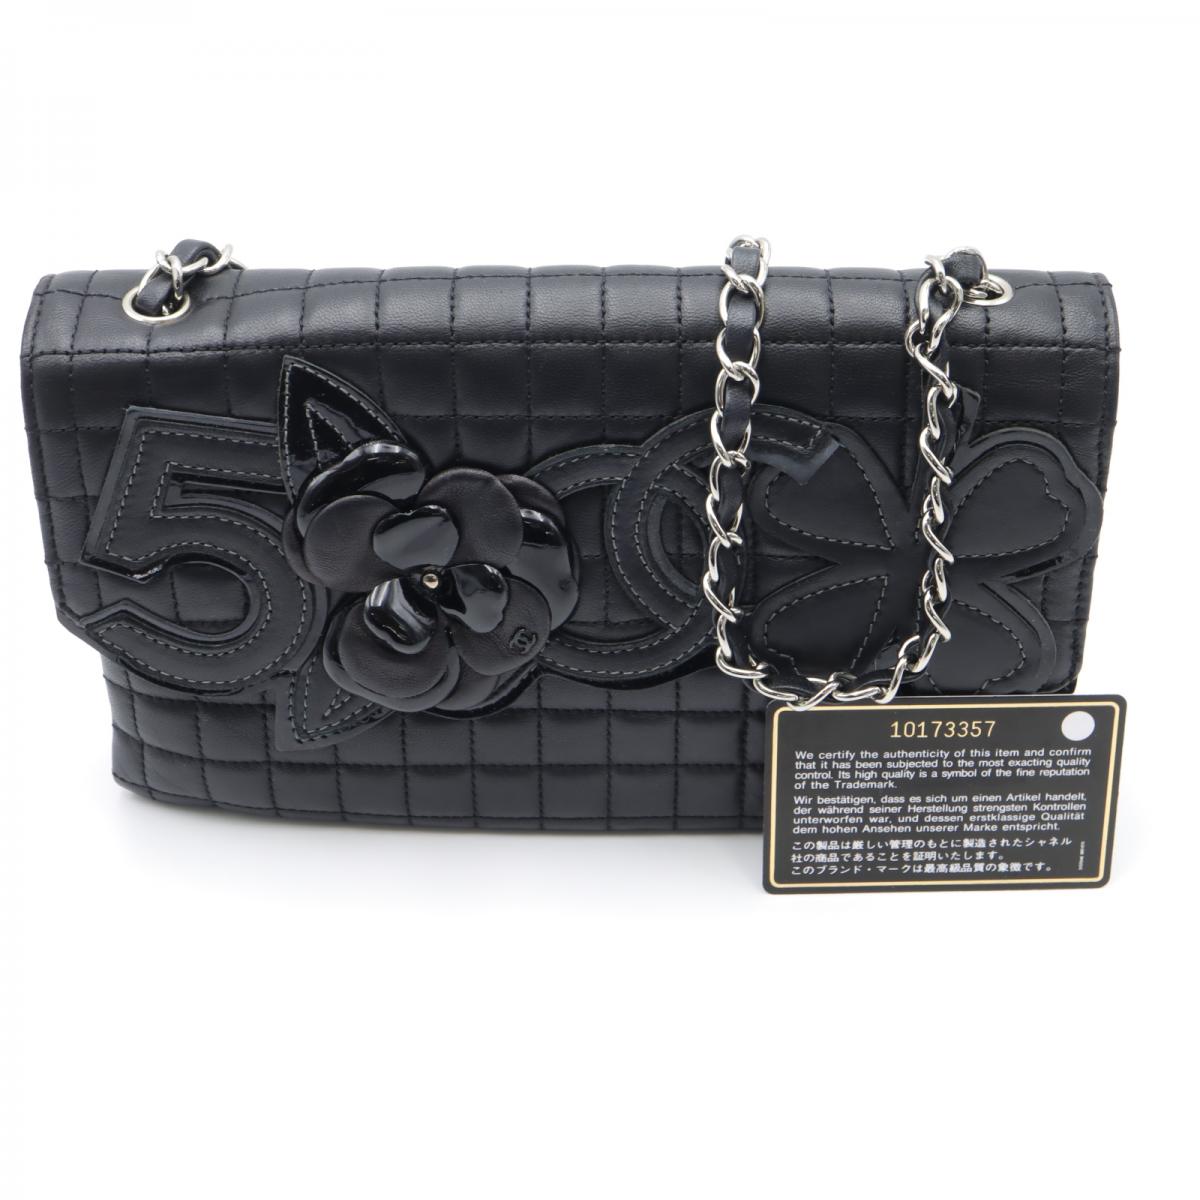 least expensive chanel item